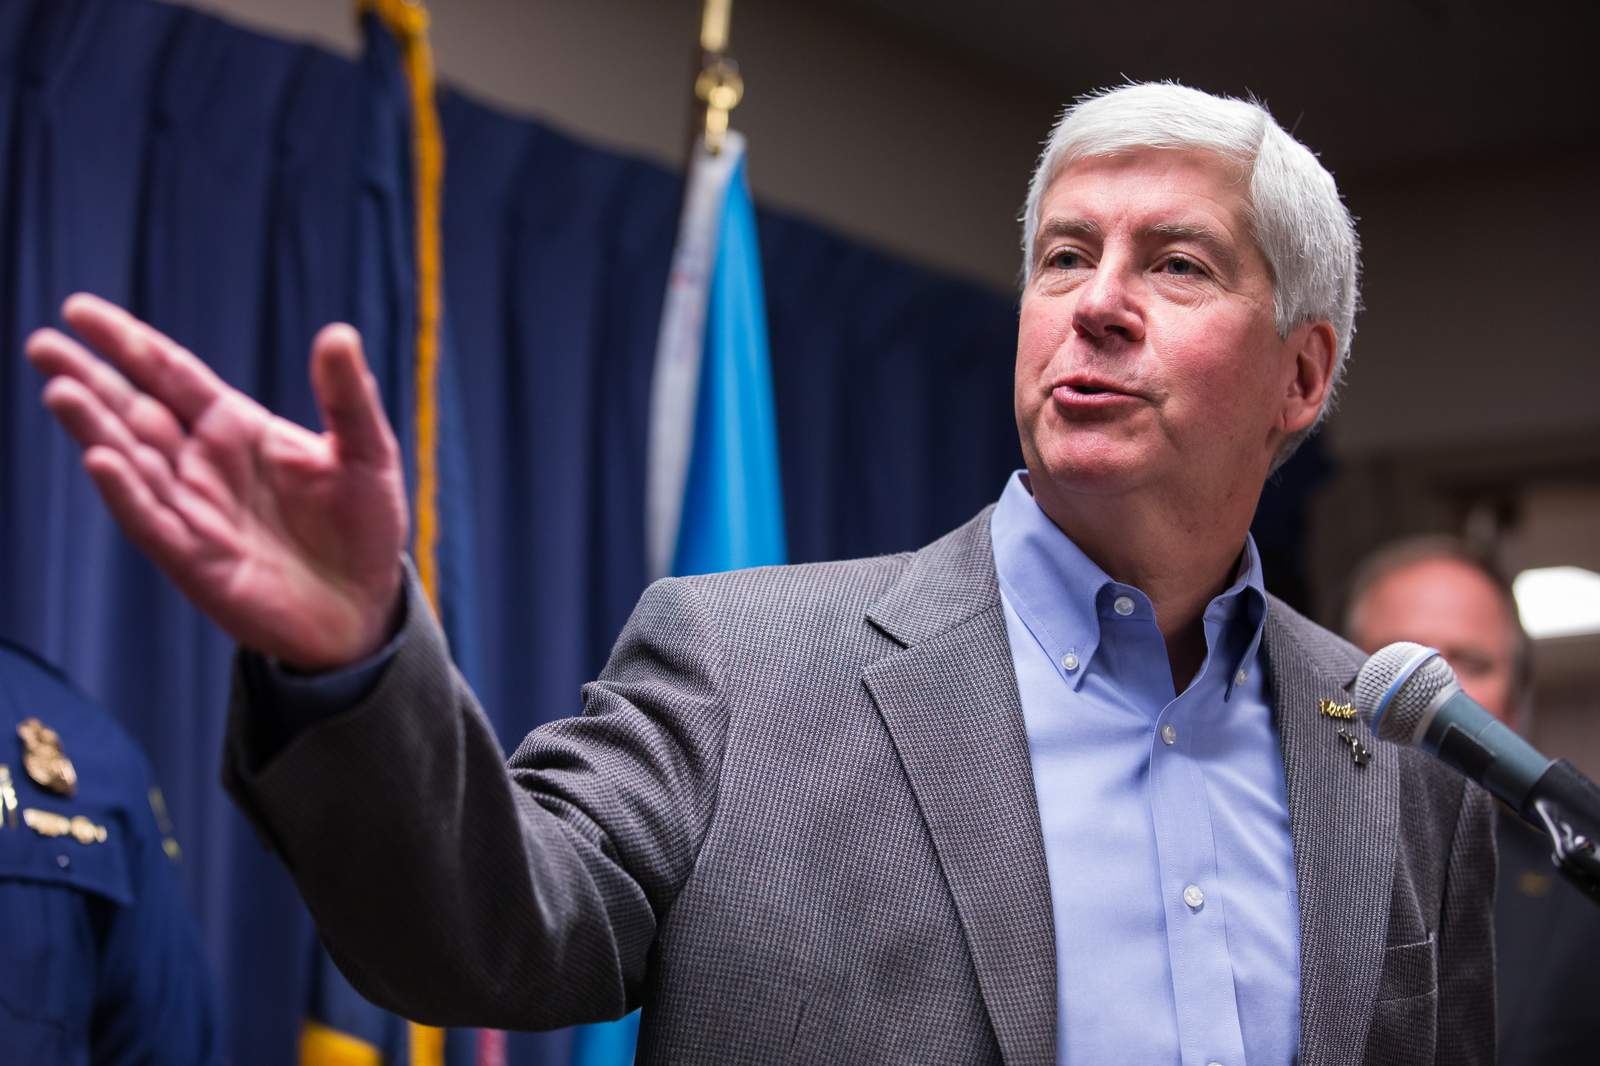 Former Gov. Rick Snyder charged with willful neglect of duty in Flint water investigation